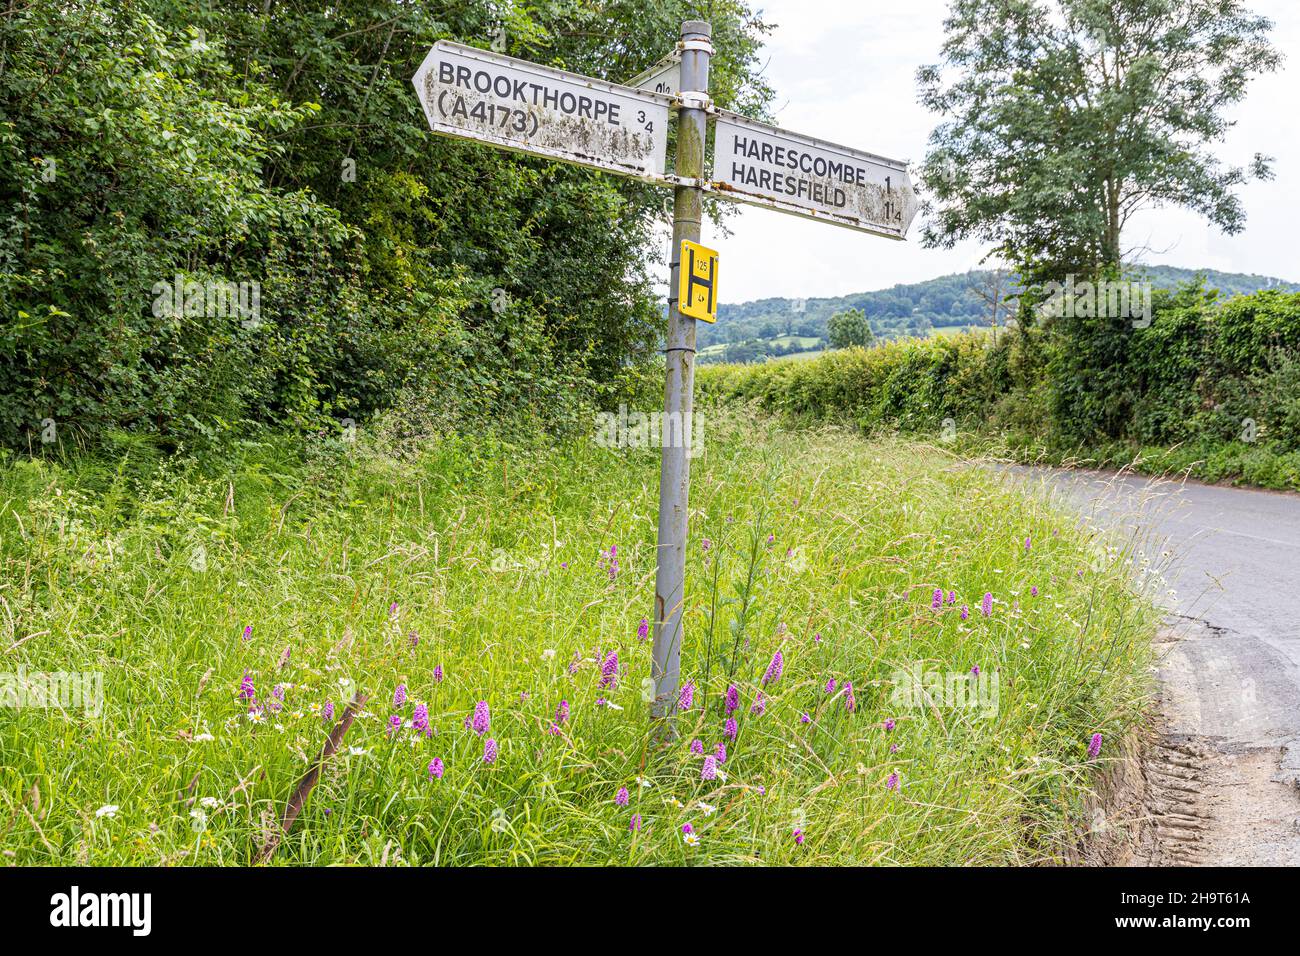 Wild orchids flowering on a verge at the base of a road sign near Brookthorpe, Gloucestershire UK Stock Photo